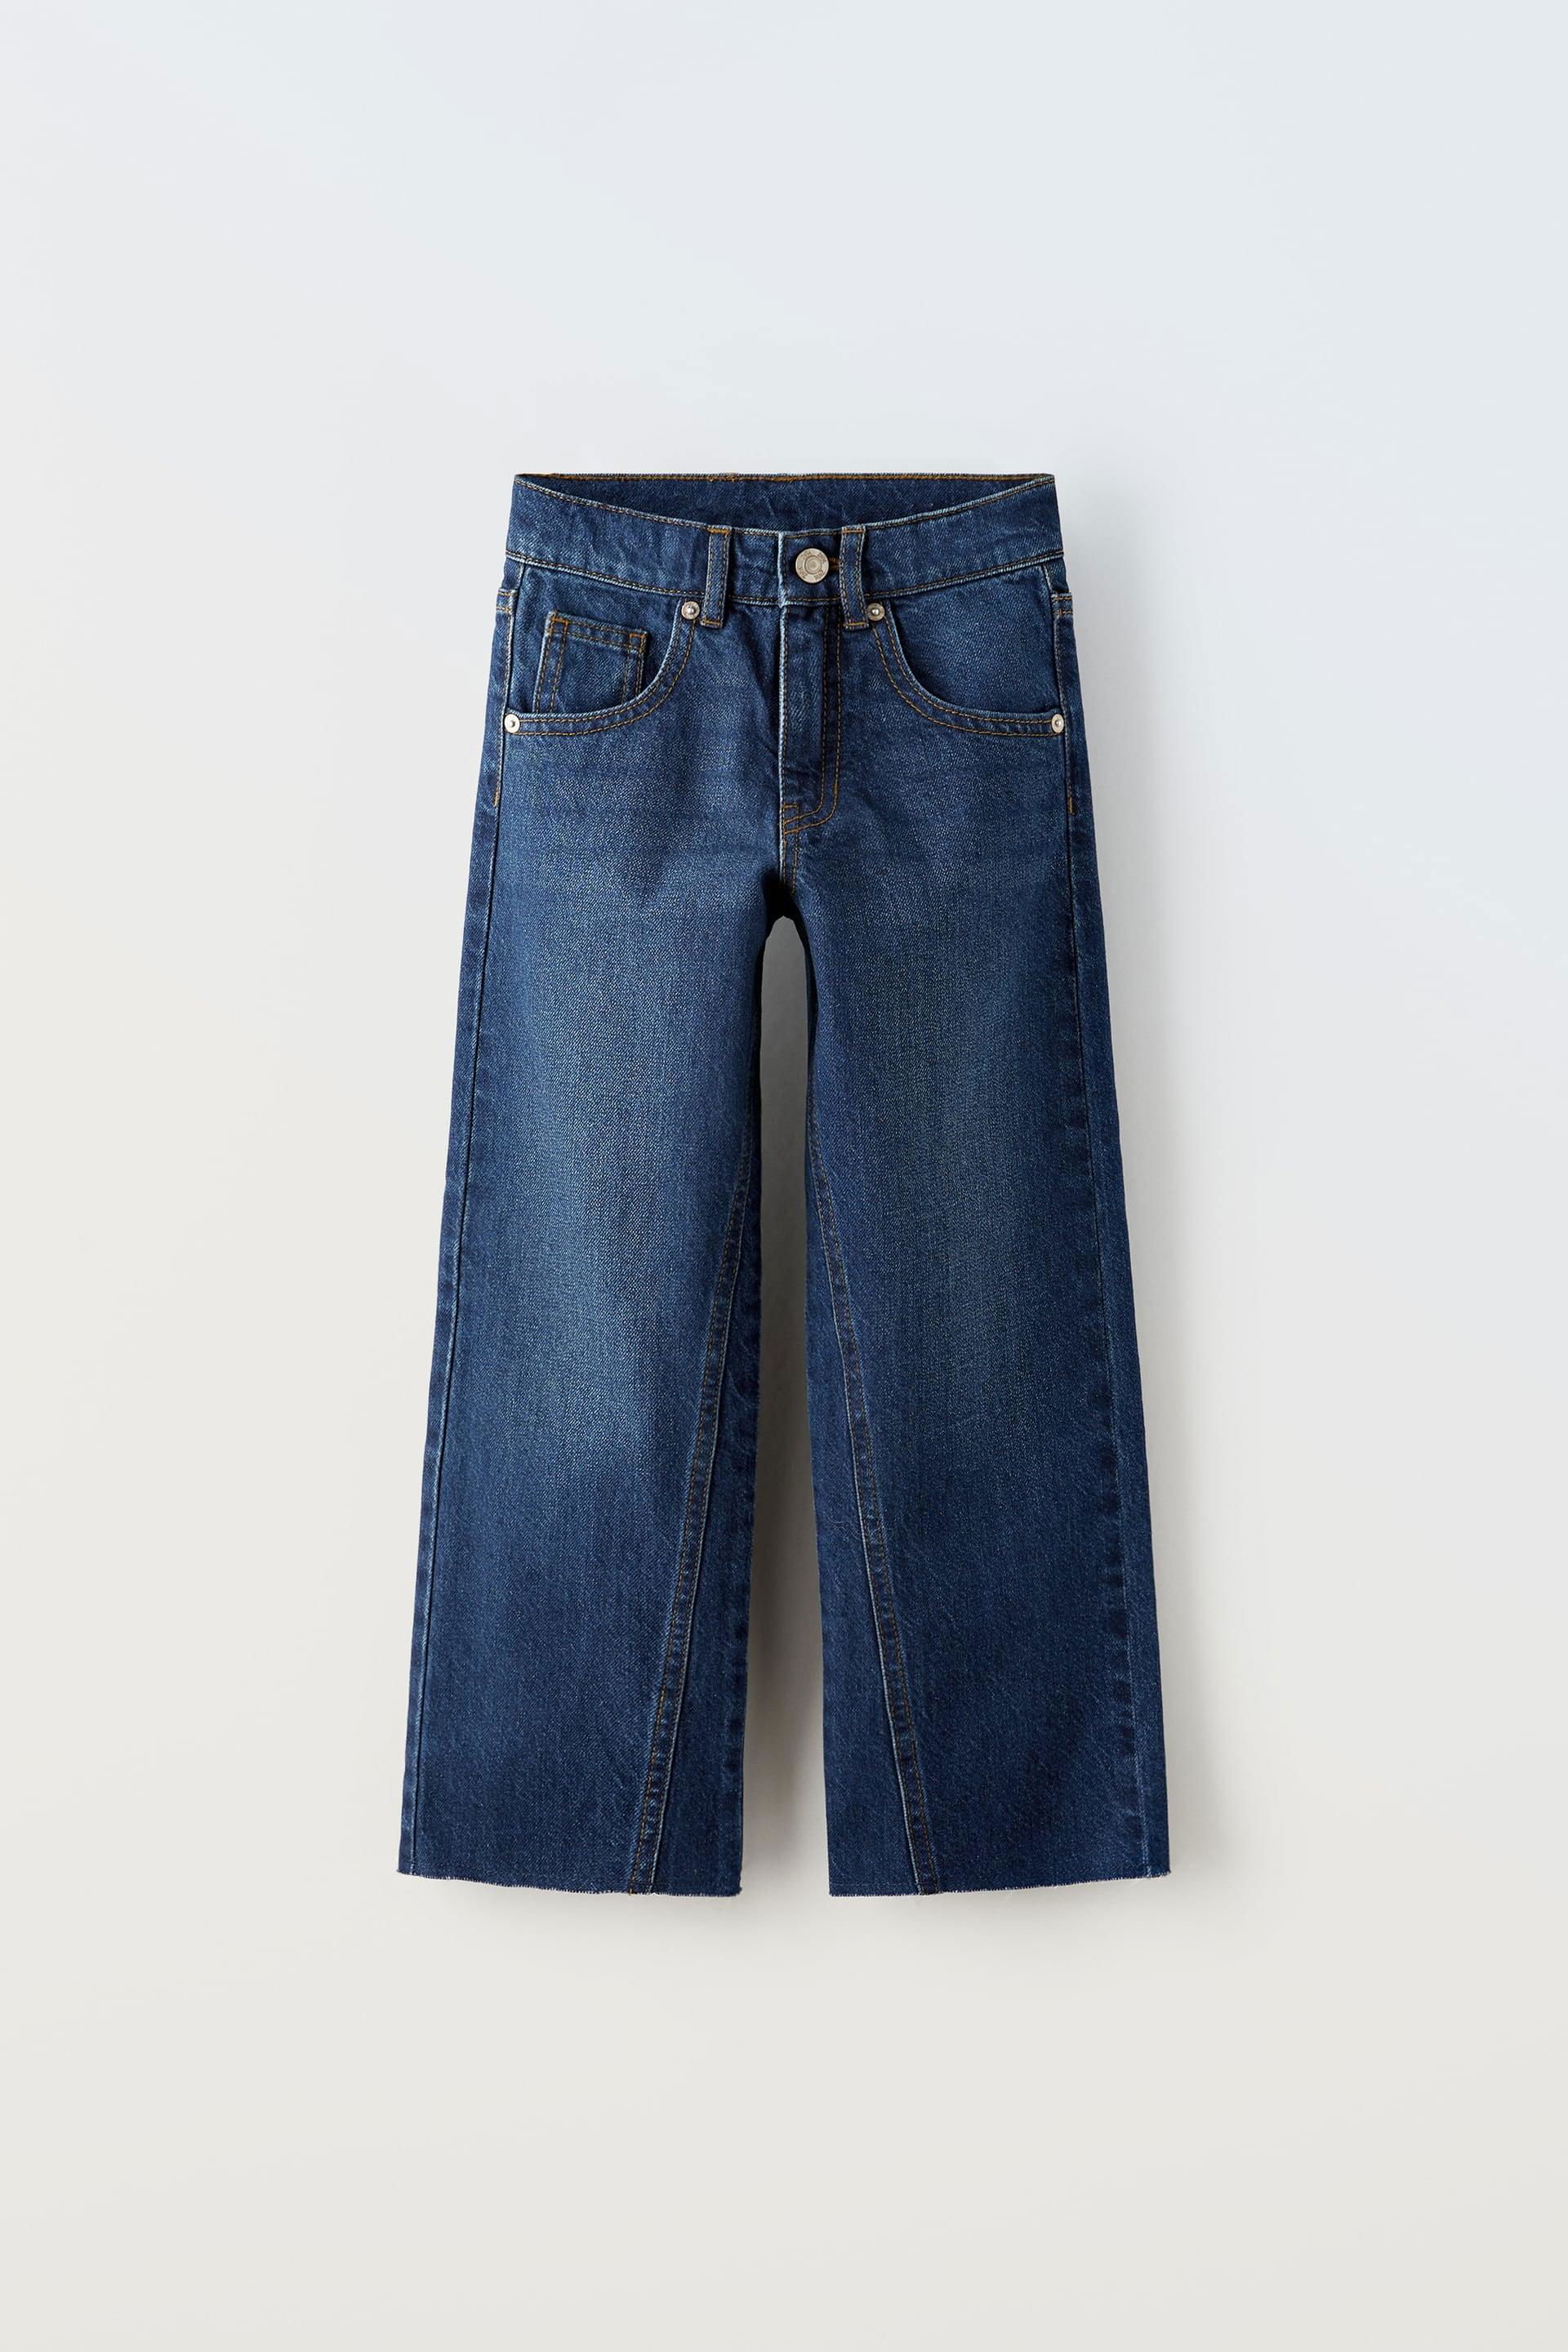 STRAIGHT FIT JEANS by ZARA